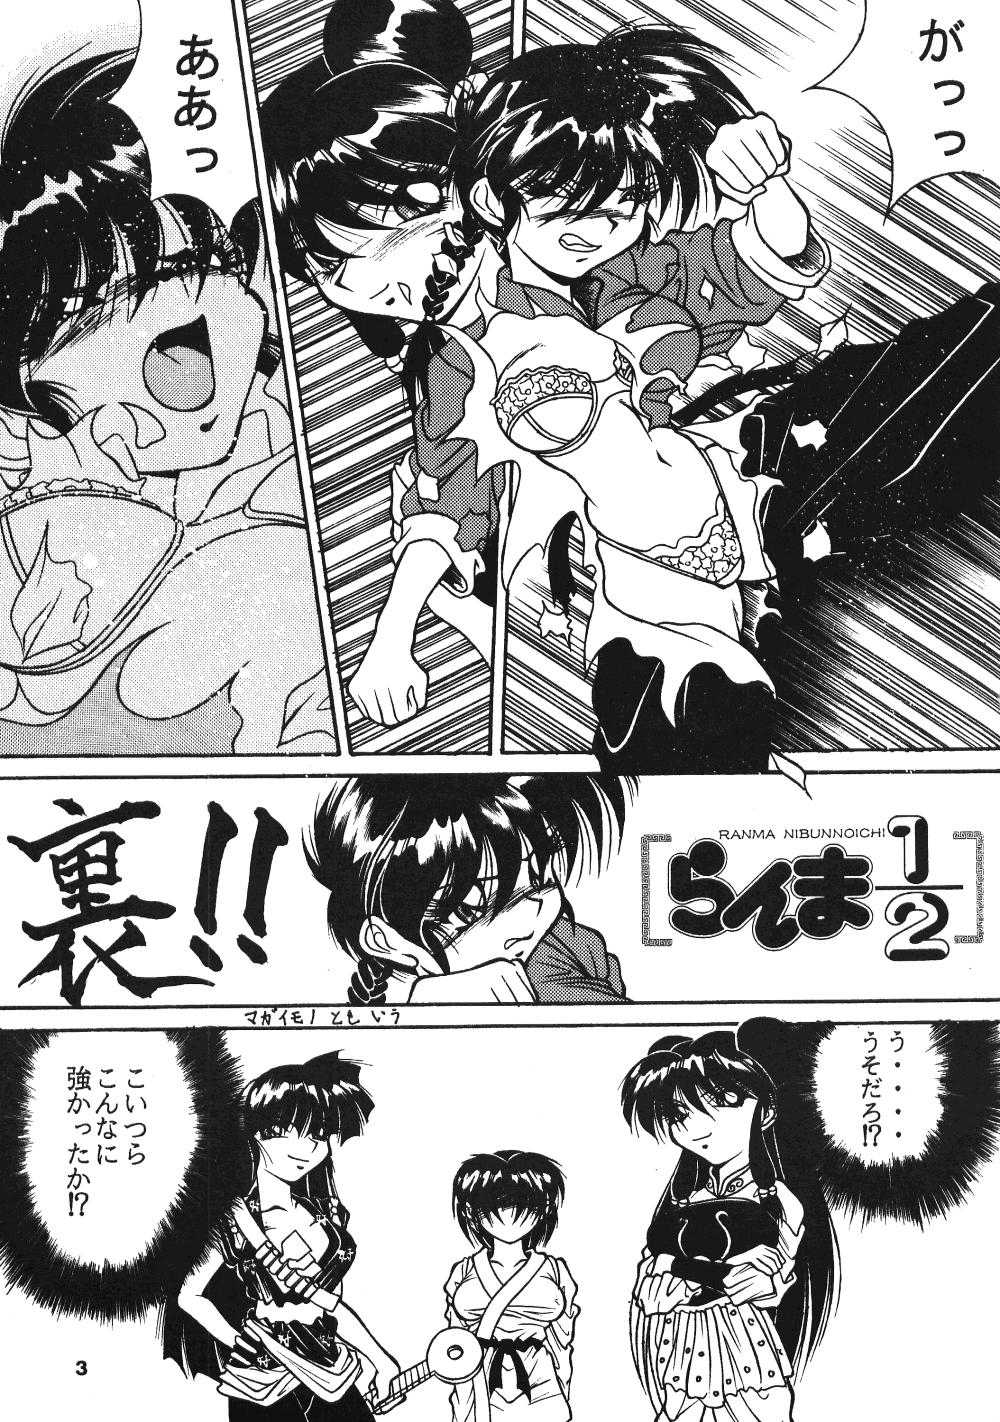 Best Blowjob Seinen Sunday - Street fighter Ranma 12 Ghost sweeper mikami White Chick - Page 2